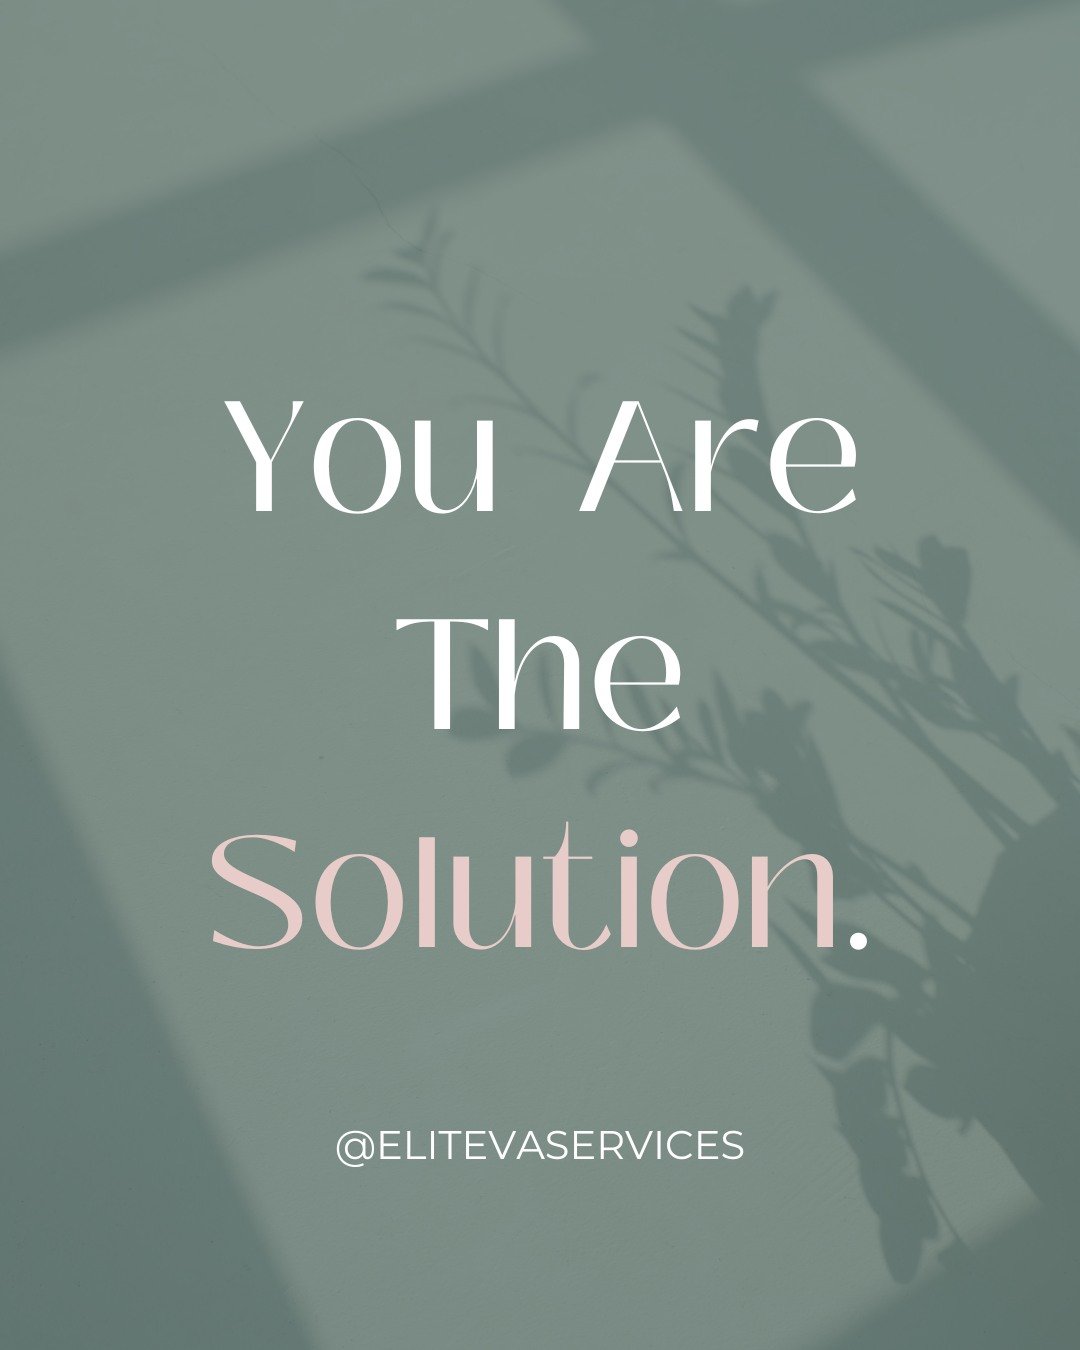 💪🏽 As a Virtual Assistant, you are the problem-solver, the person who is solution-driven and makes clients' lives easier. 

🧲 To attract your ideal clients, it&rsquo;s important to understand their struggles and pinpoint exactly where they need he